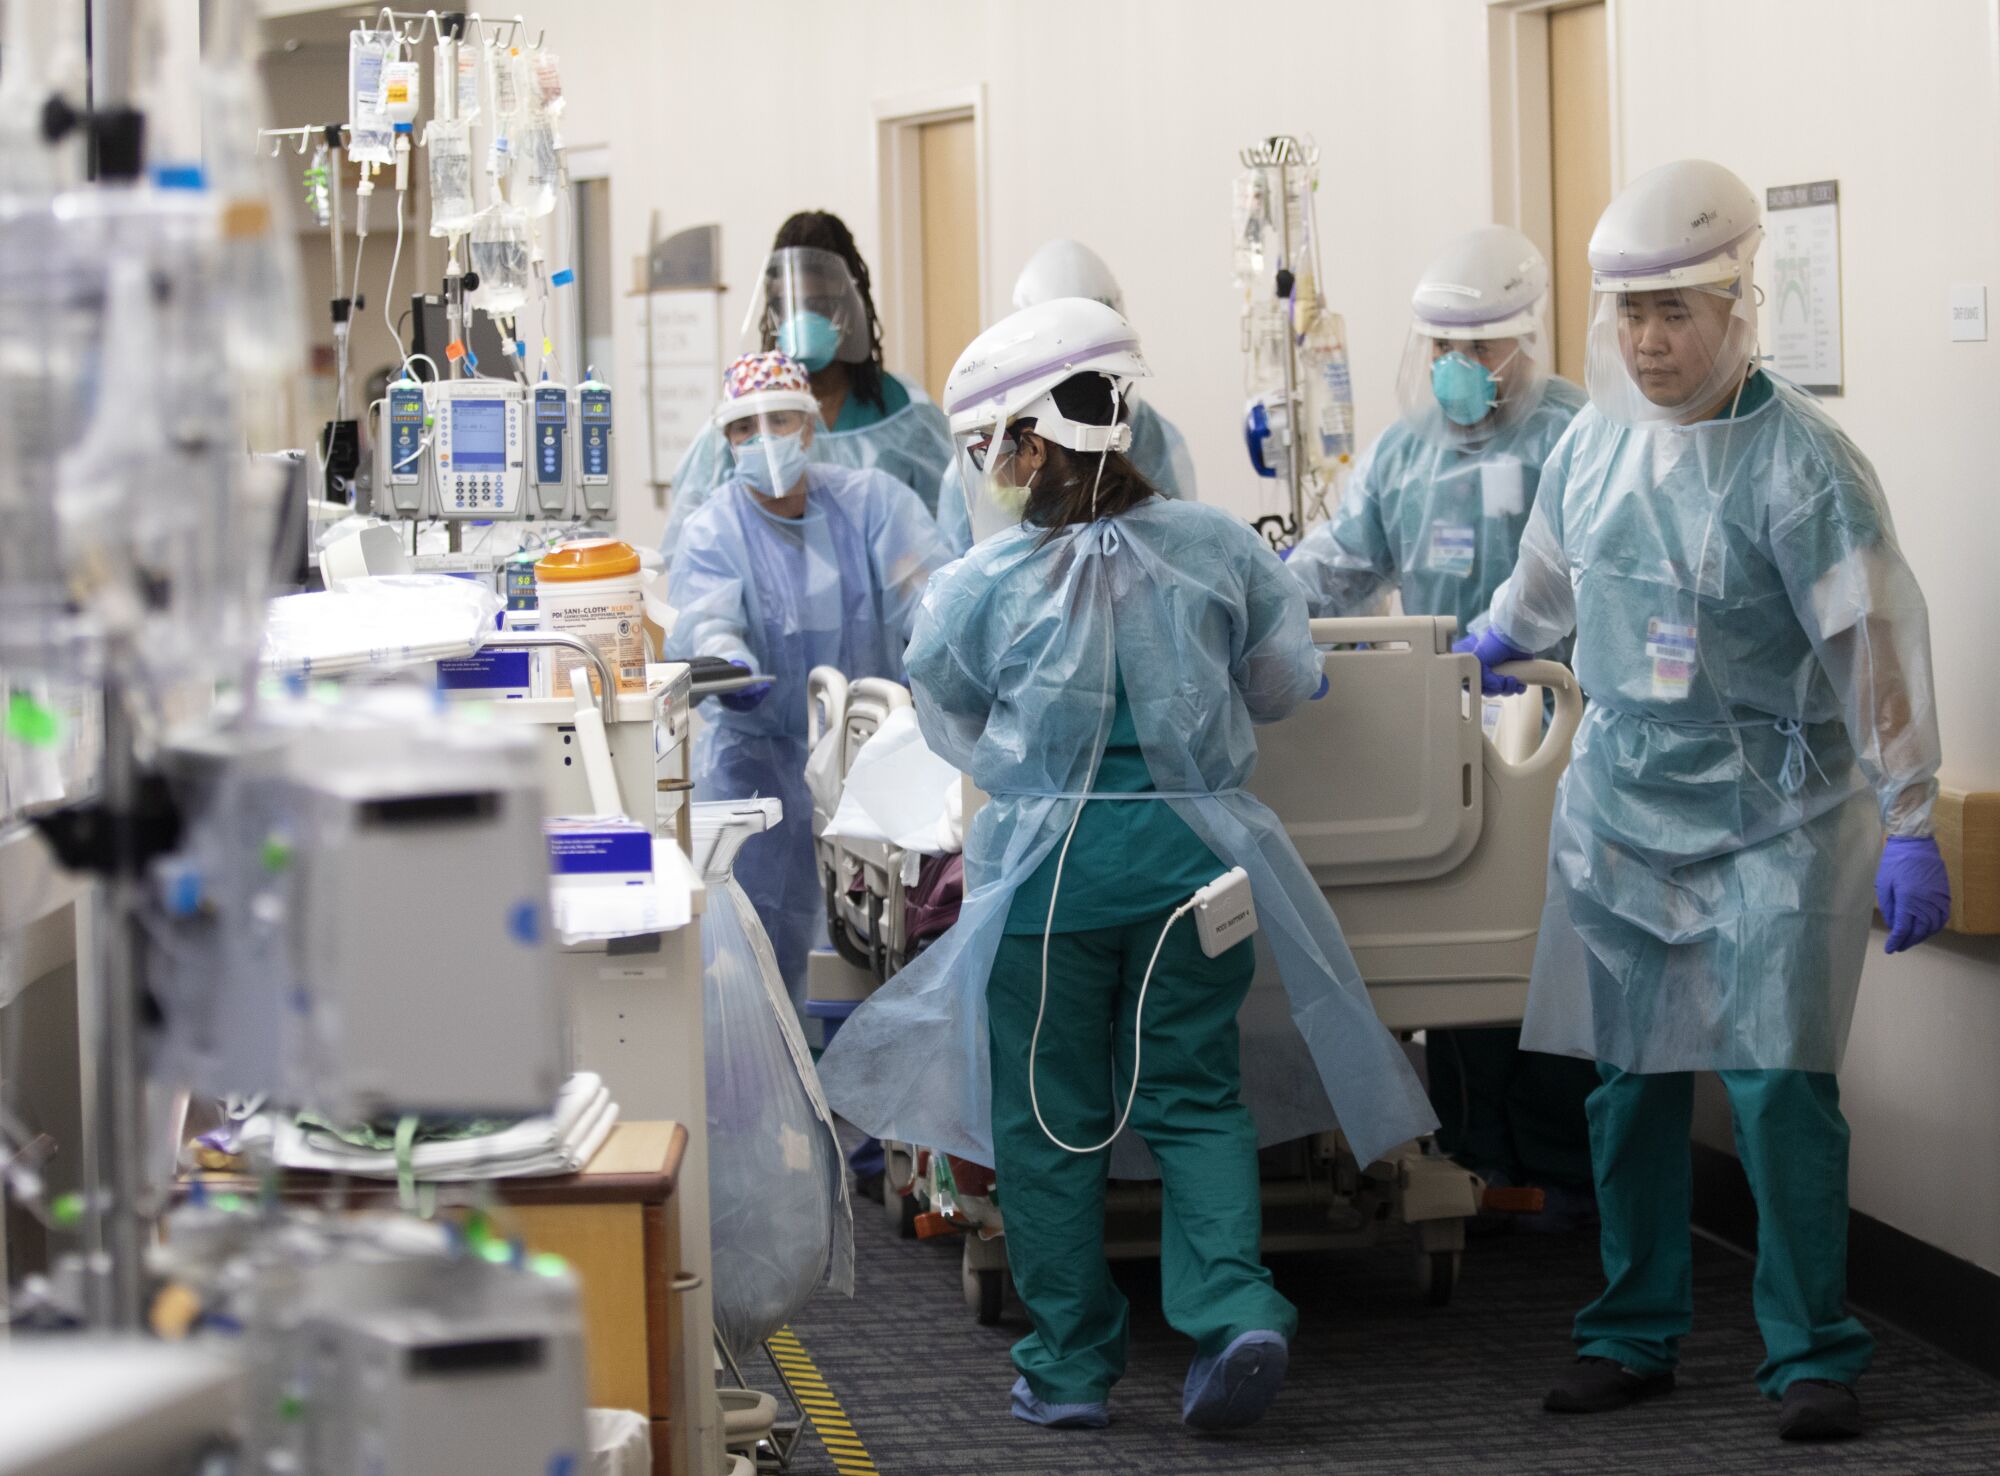 Hospital staff in protective gear move a gurney through the ER.